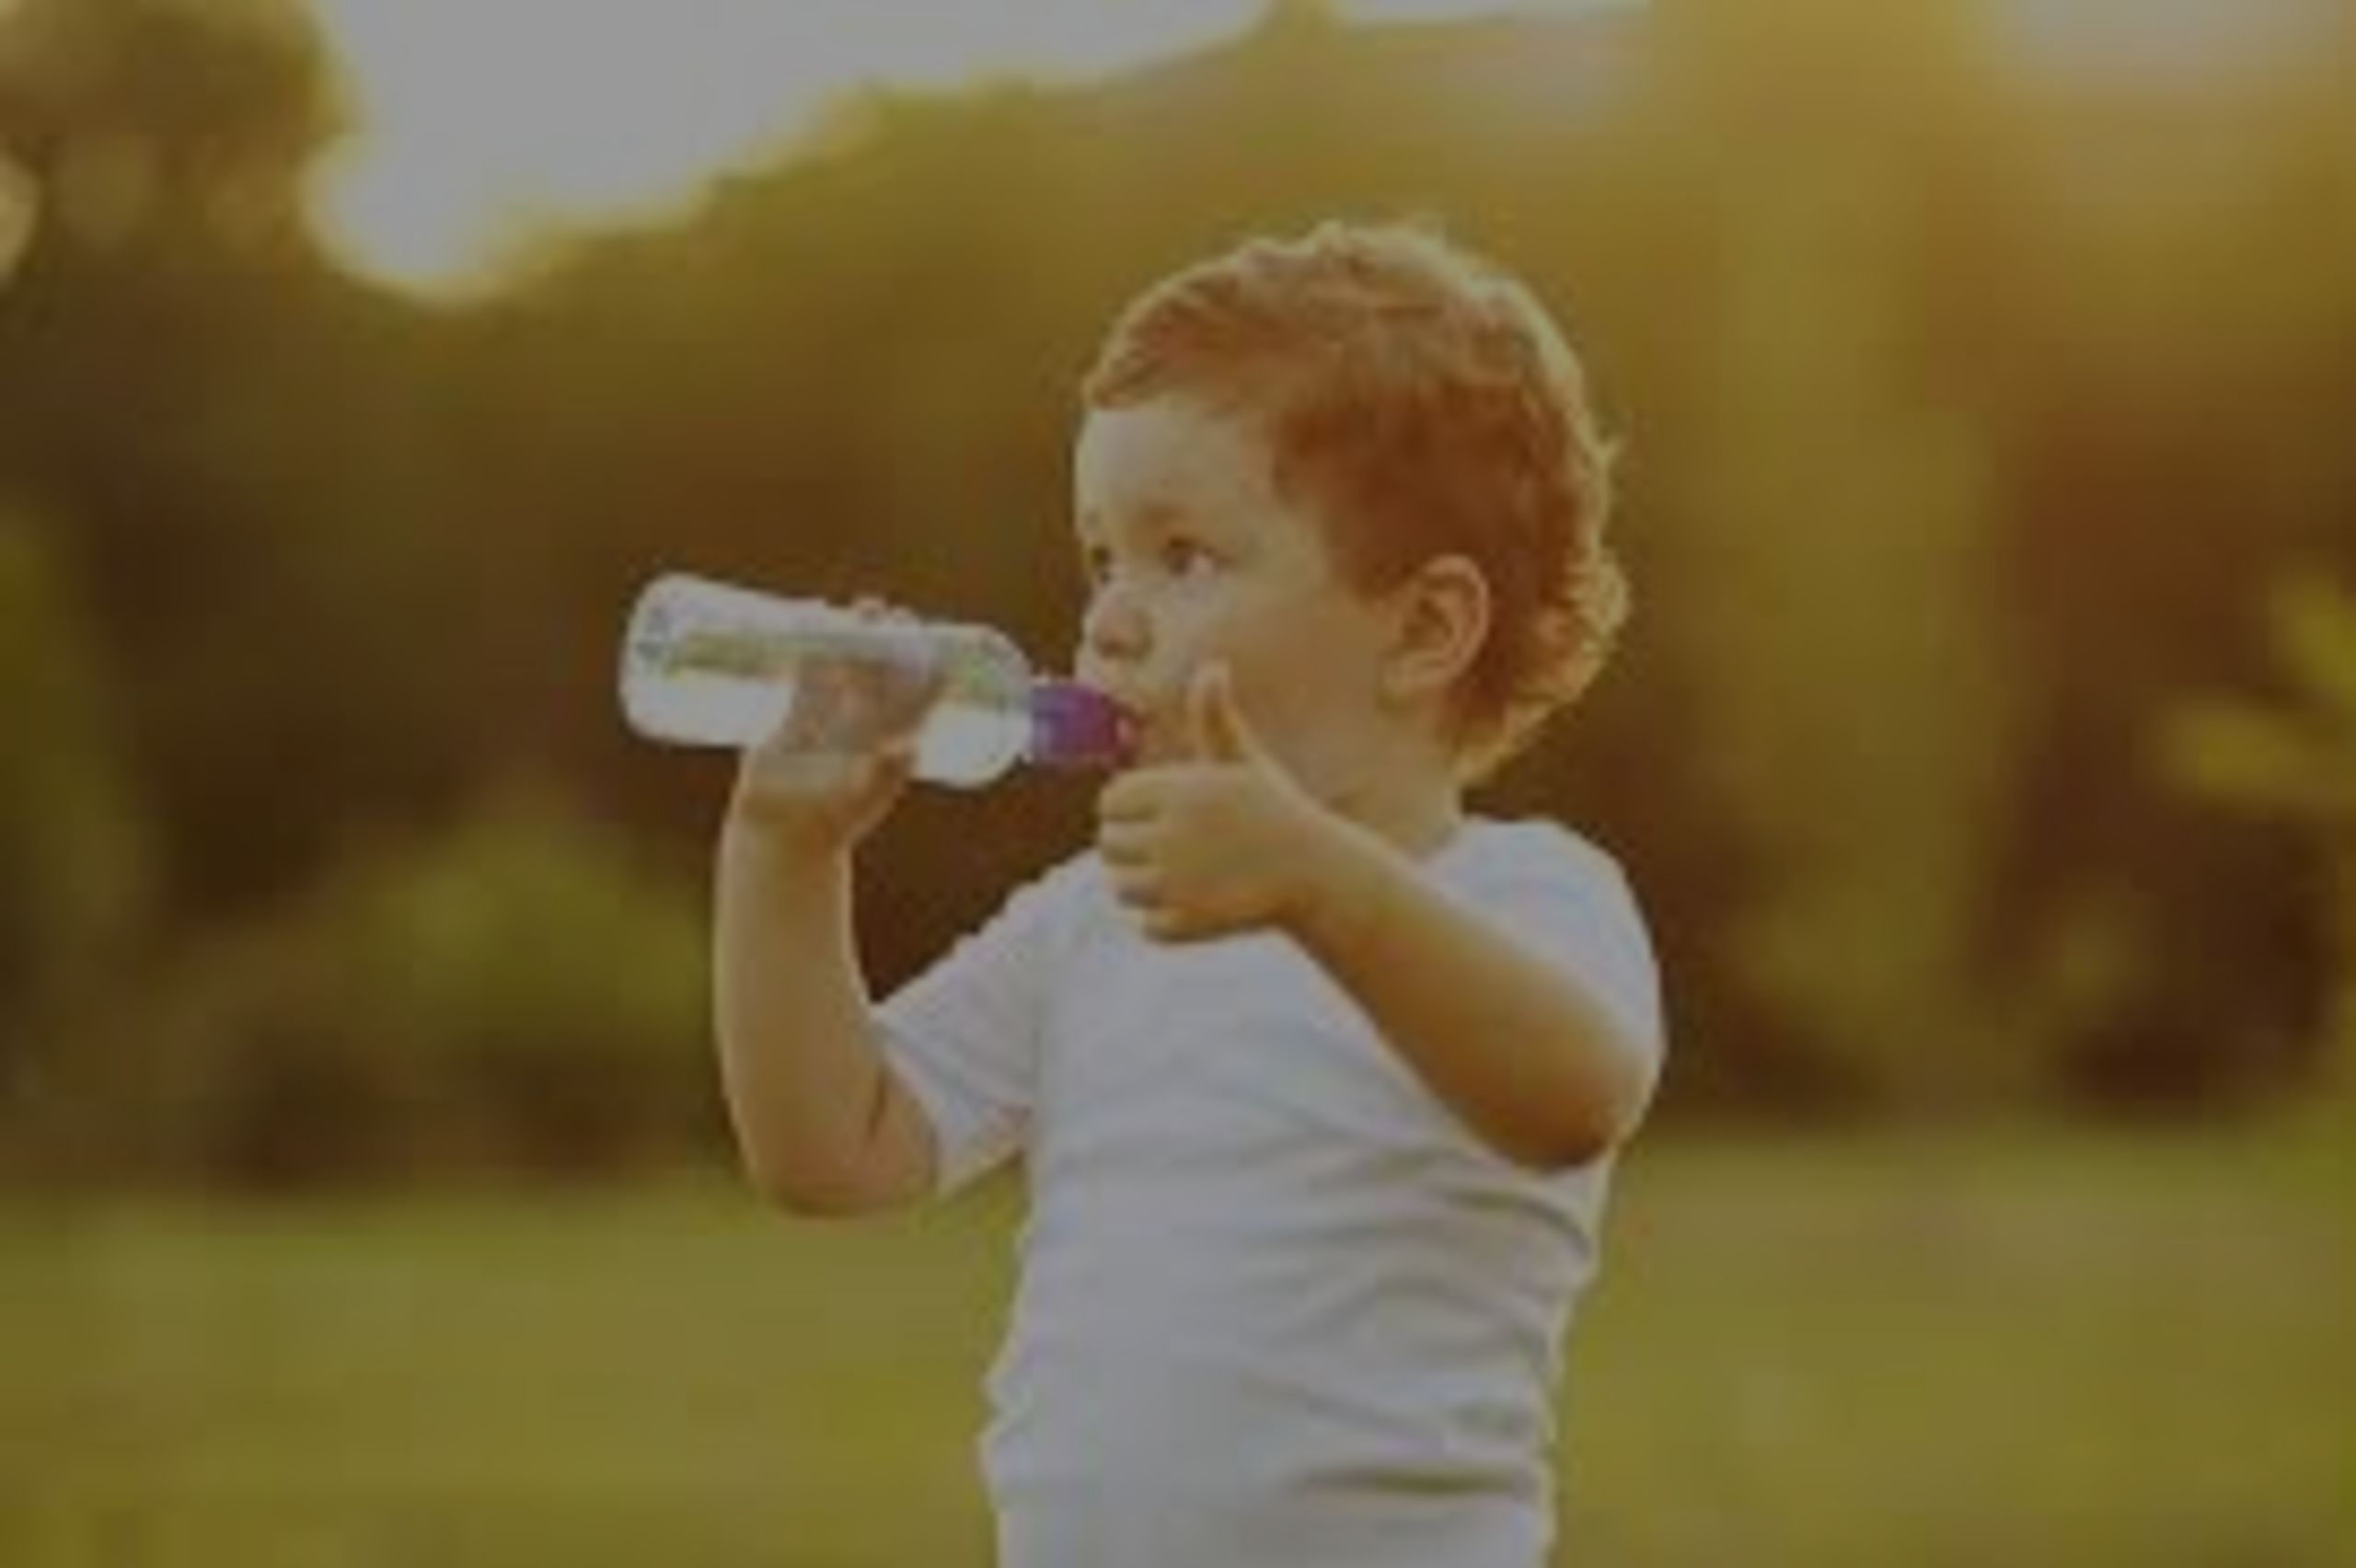 Stay hydrated during hot summer days